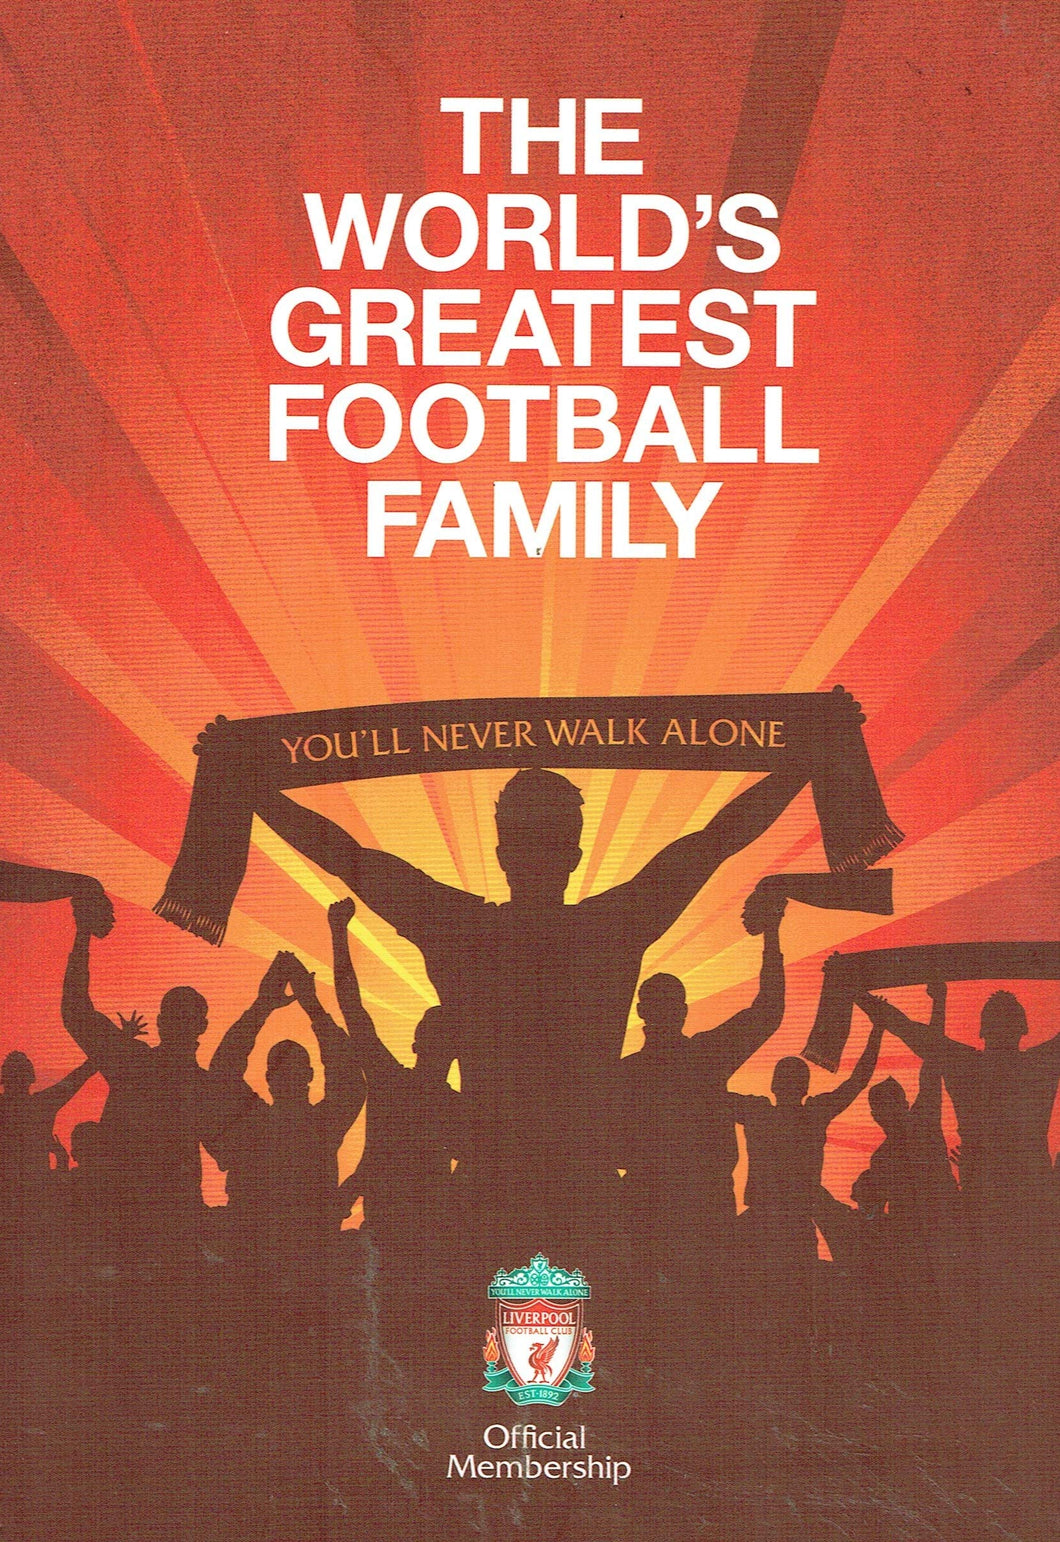 The World's Greatest Football Family: Liverpool Football Club (LFC) Official Membership Book 2018/19